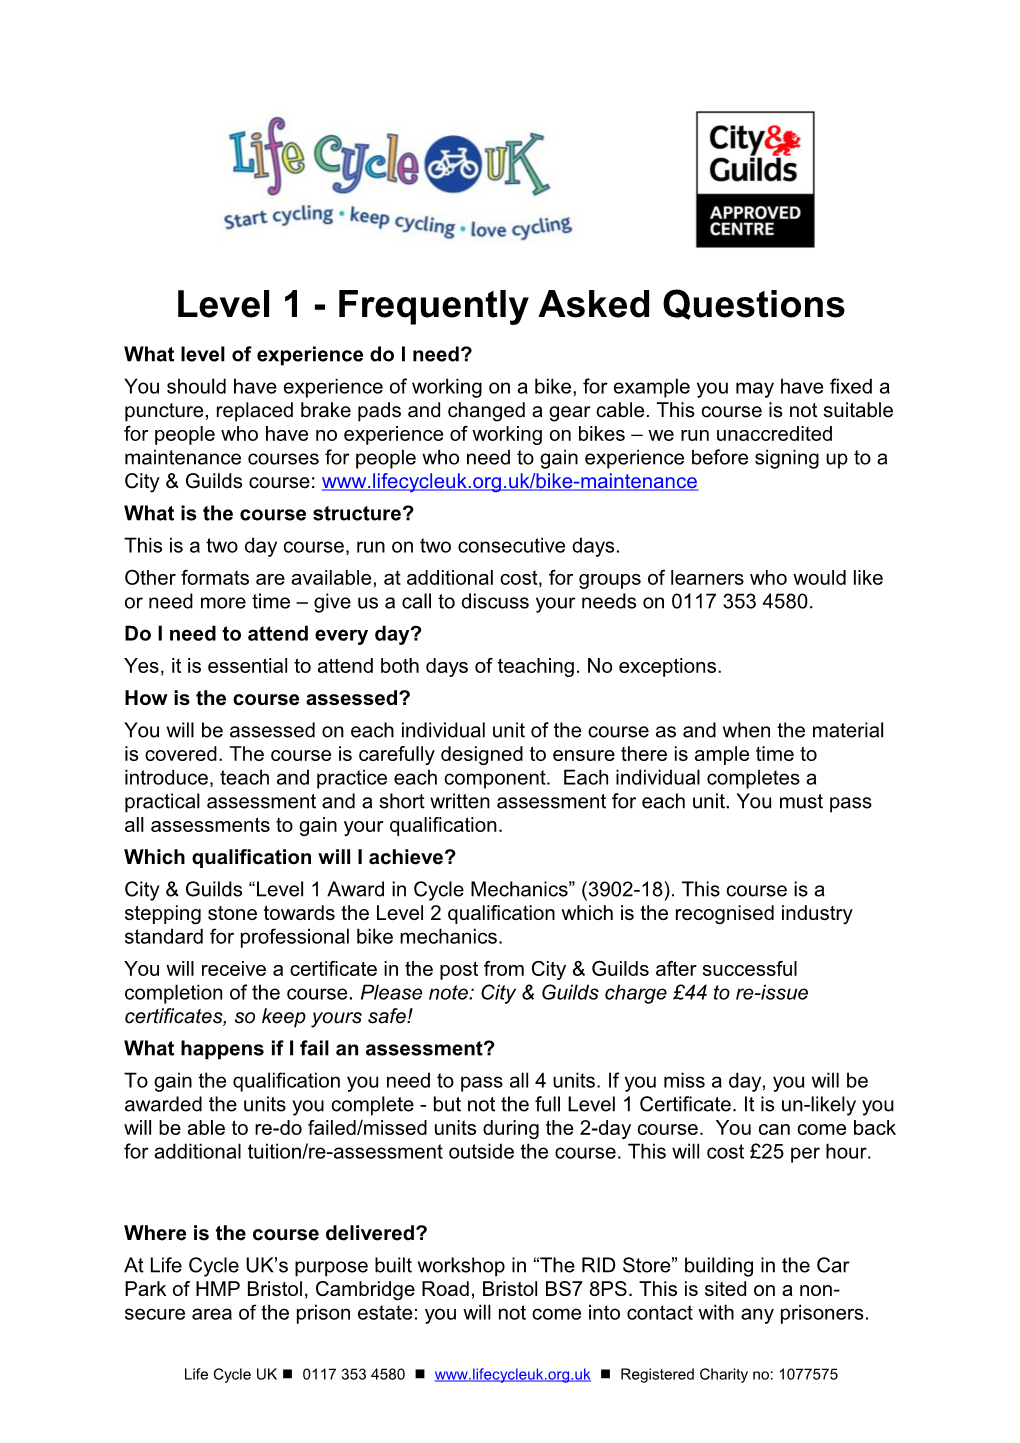 Level 1 - Frequently Asked Questions